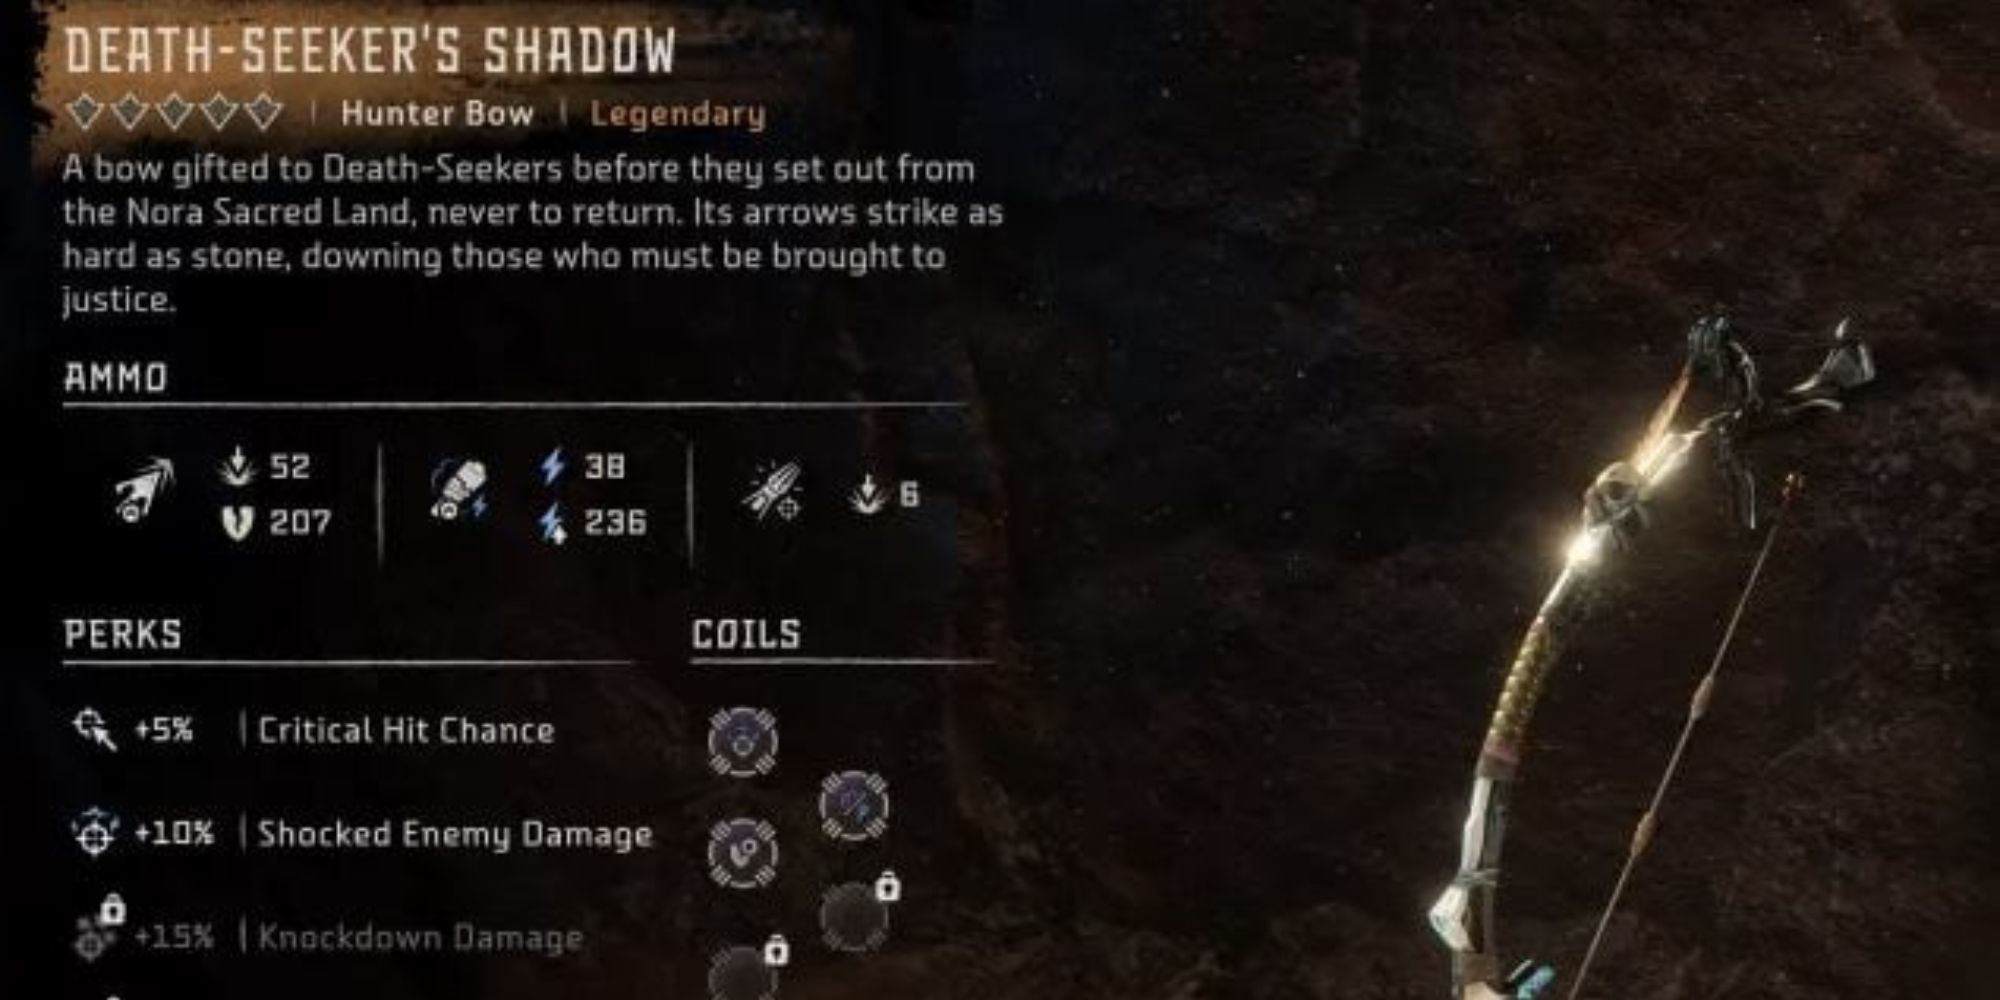 Death-Seekers-Shadow in-game menu with stats